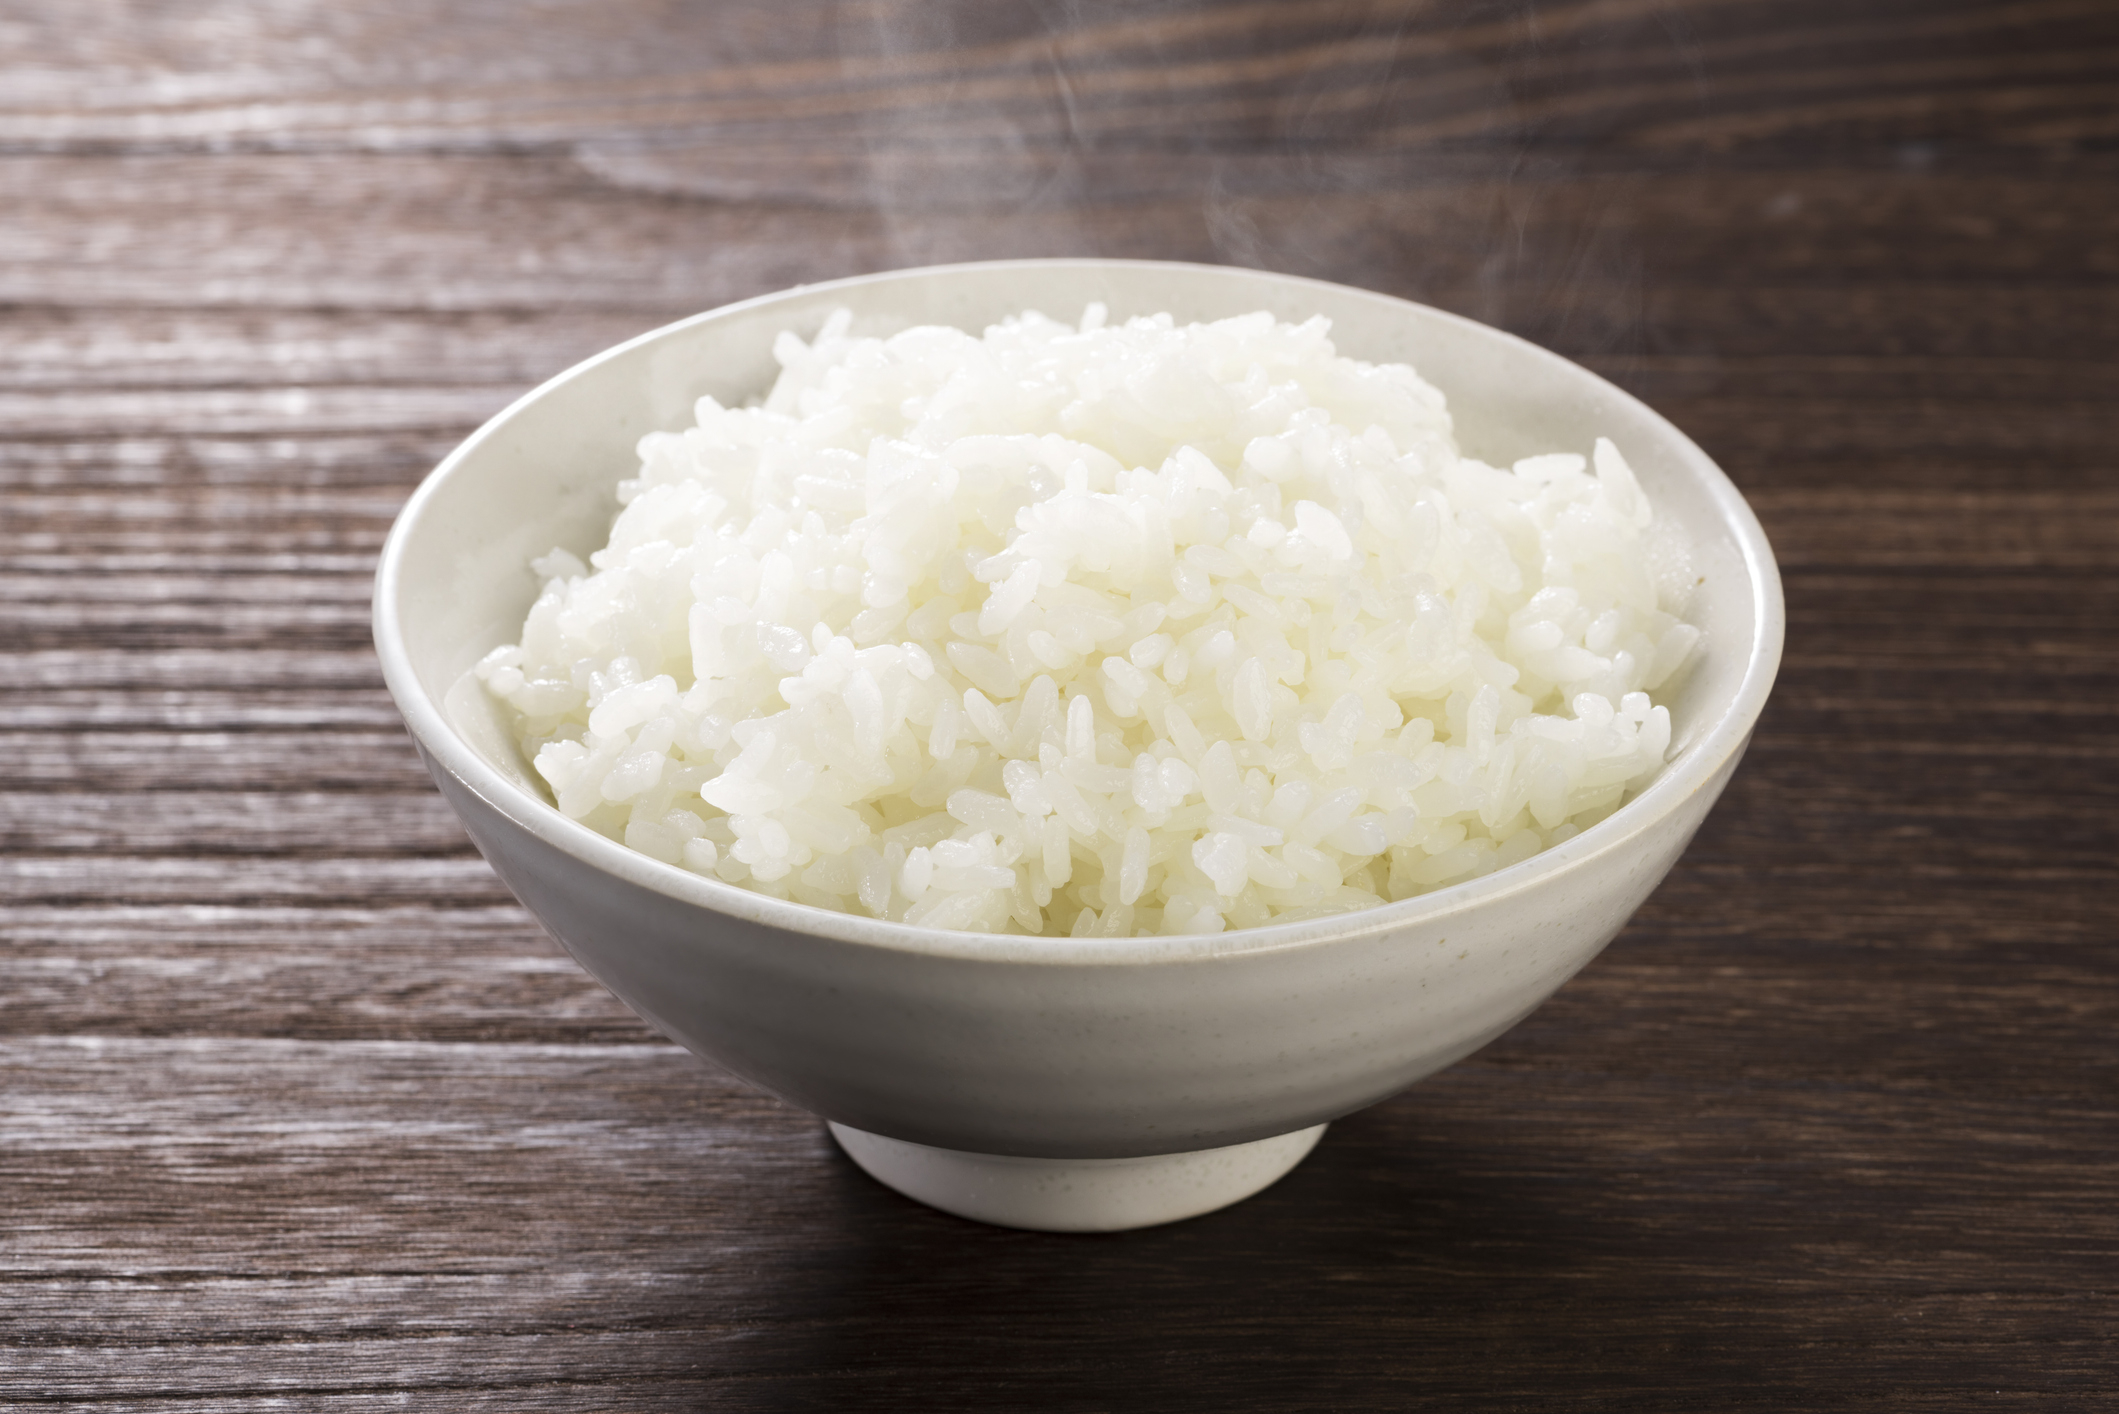 A steaming bowl of cooked rice on a wooden table